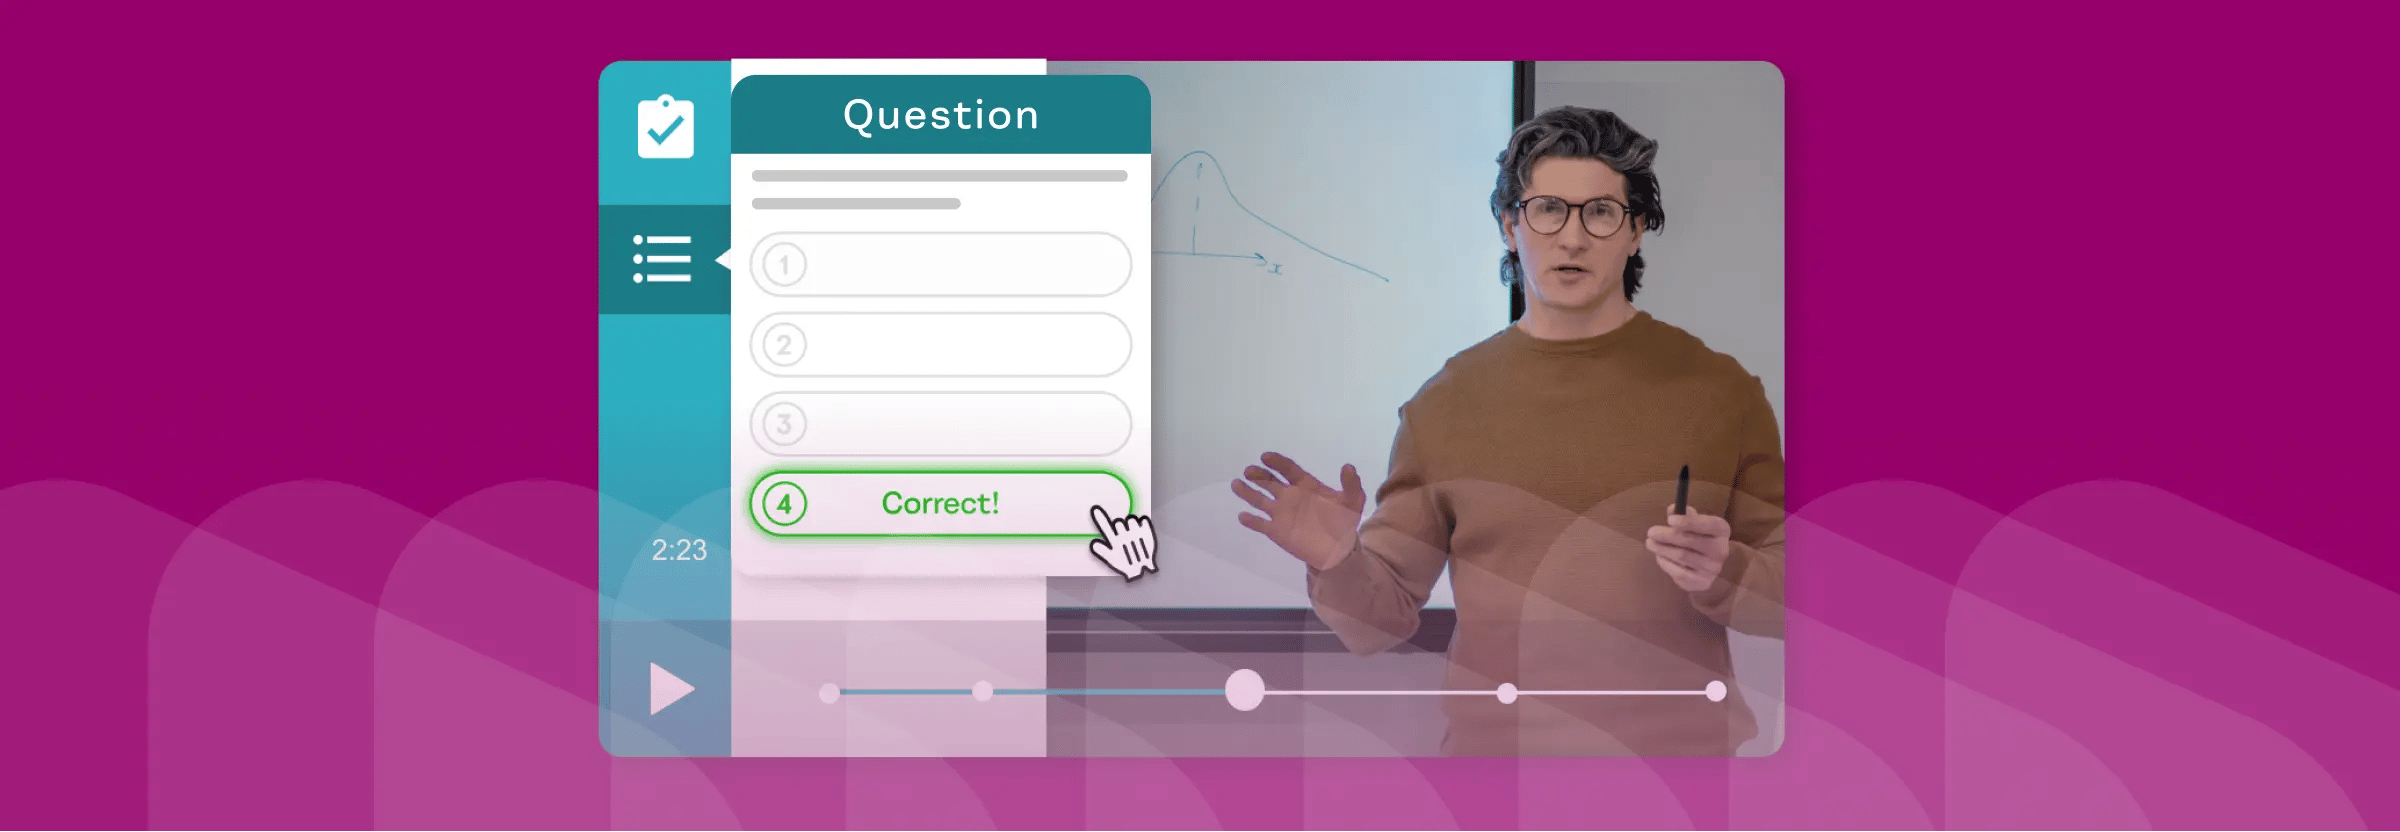 Example of interactive question popping up on video.